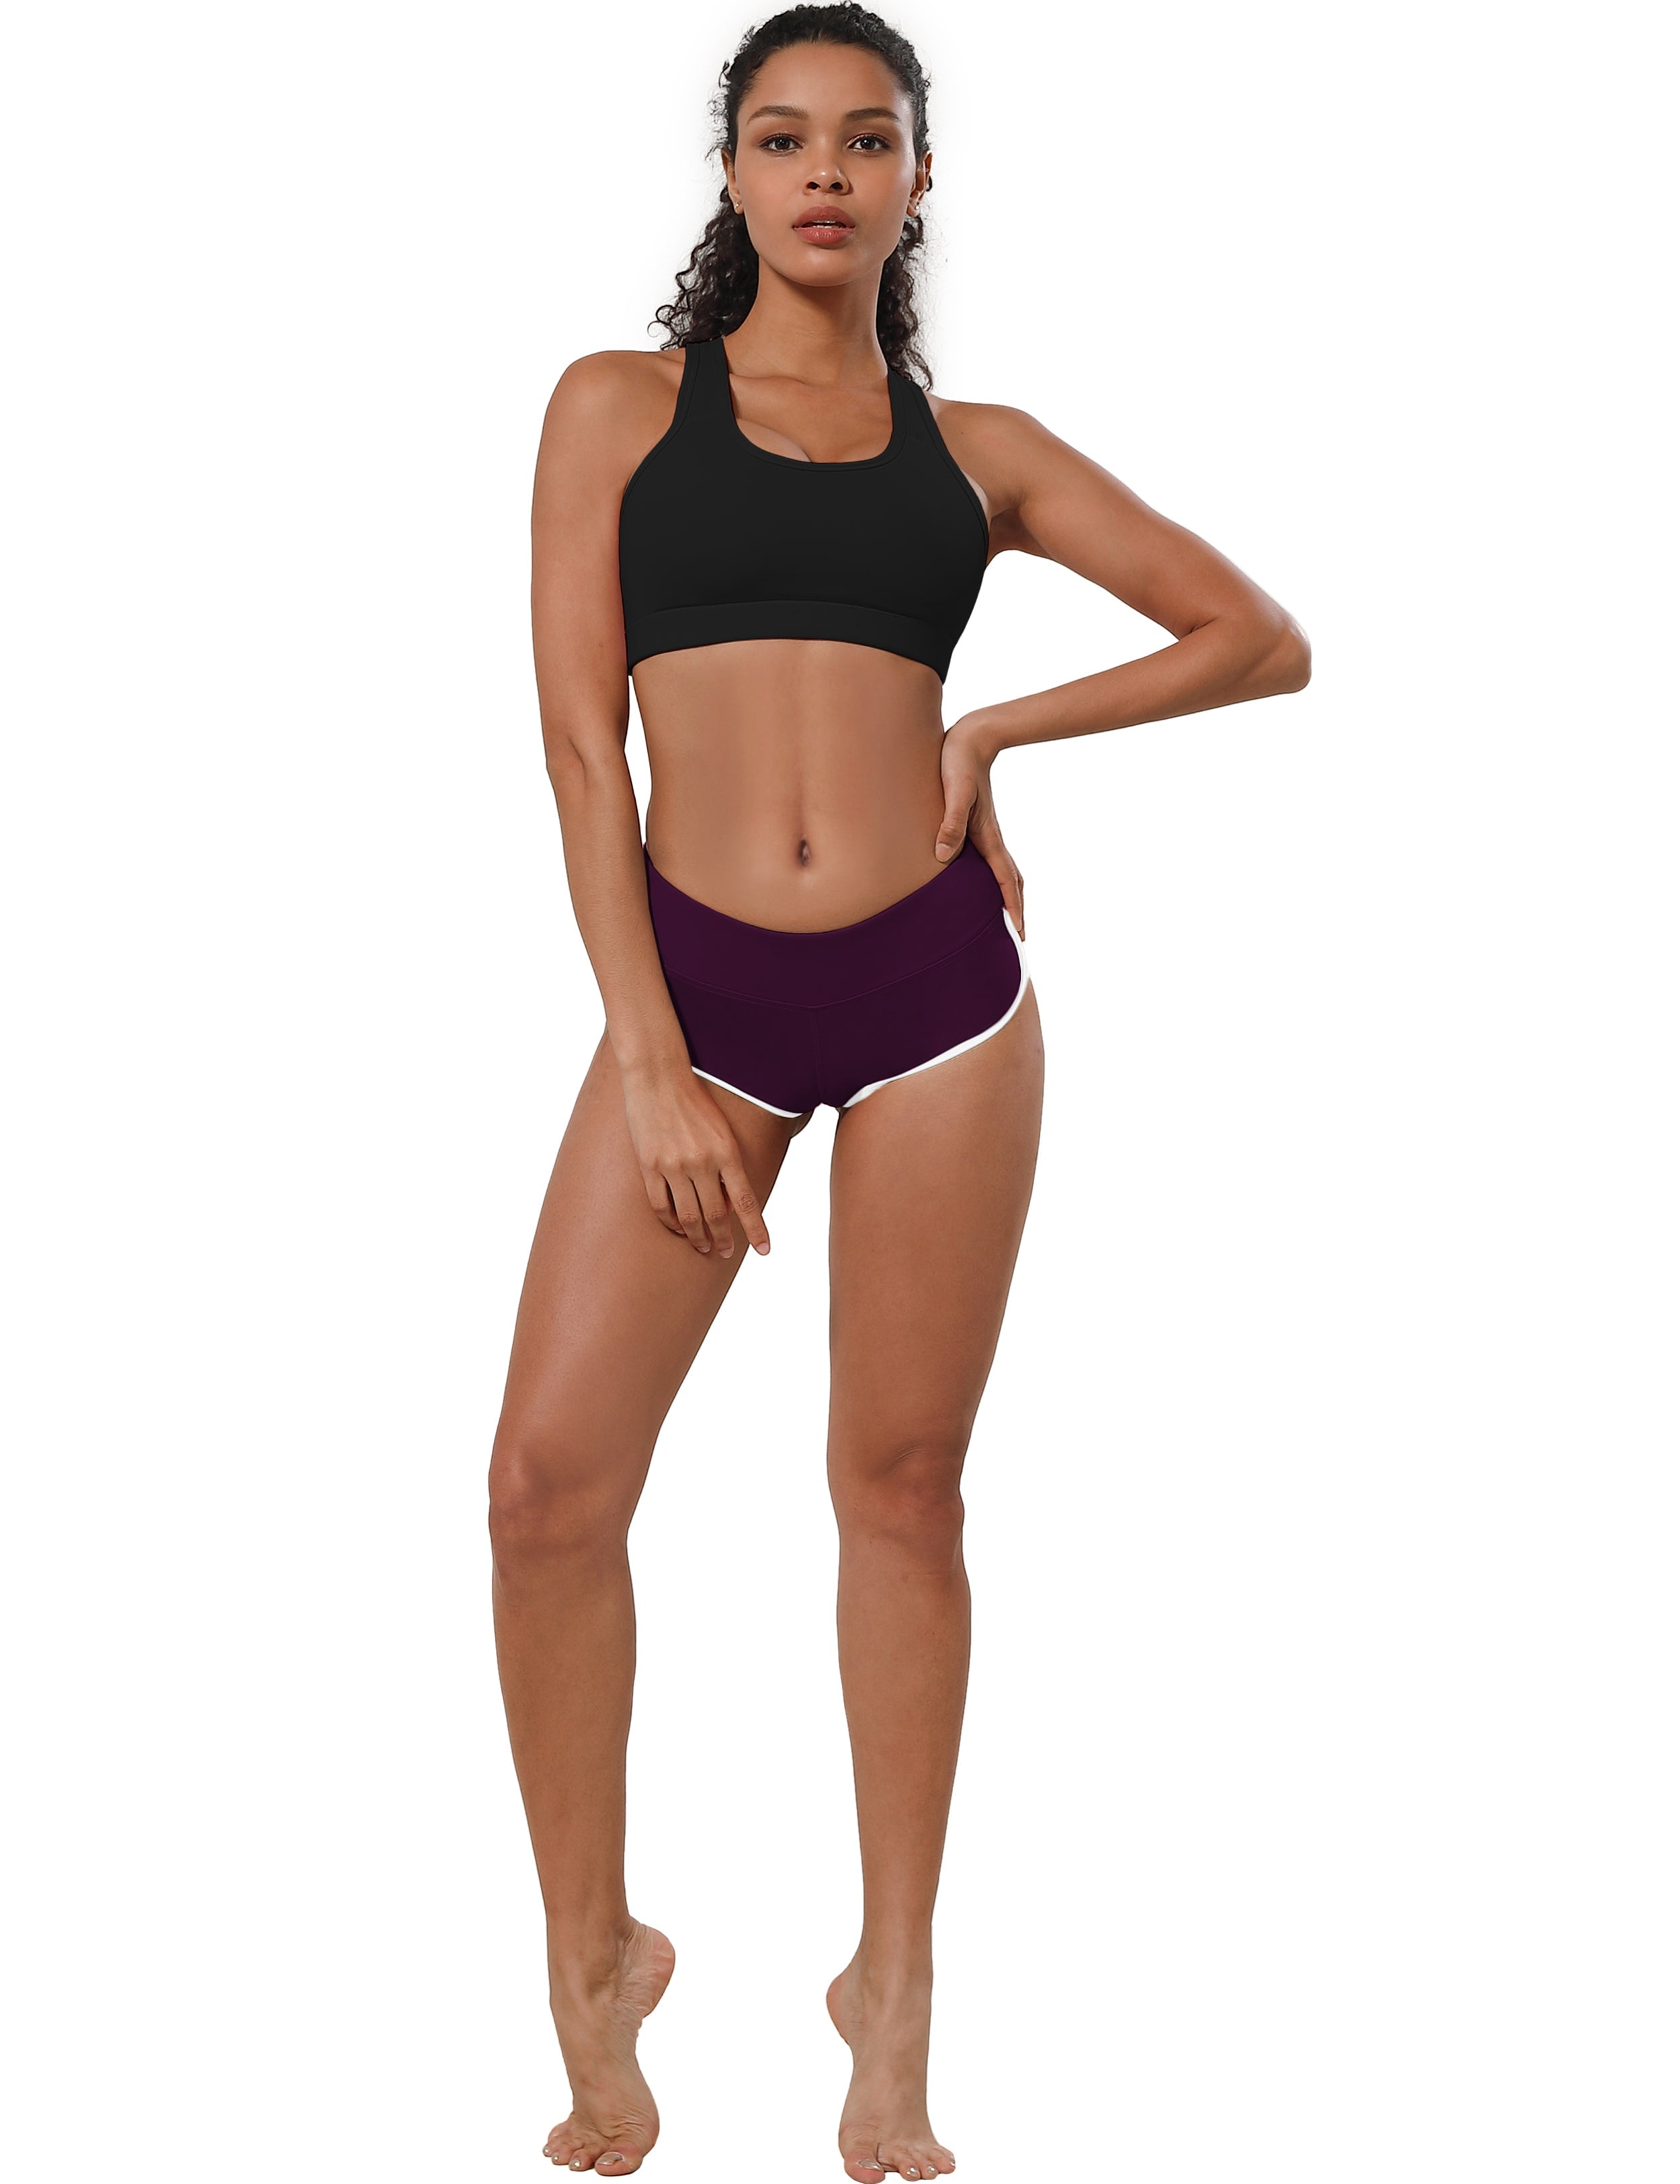 Sexy Booty Yoga Shorts plum Sleek, soft, smooth and totally comfortable: our newest sexy style is here. Softest-ever fabric High elasticity High density 4-way stretch Fabric doesn't attract lint easily No see-through Moisture-wicking Machine wash 75%Nylon/25%Spandex